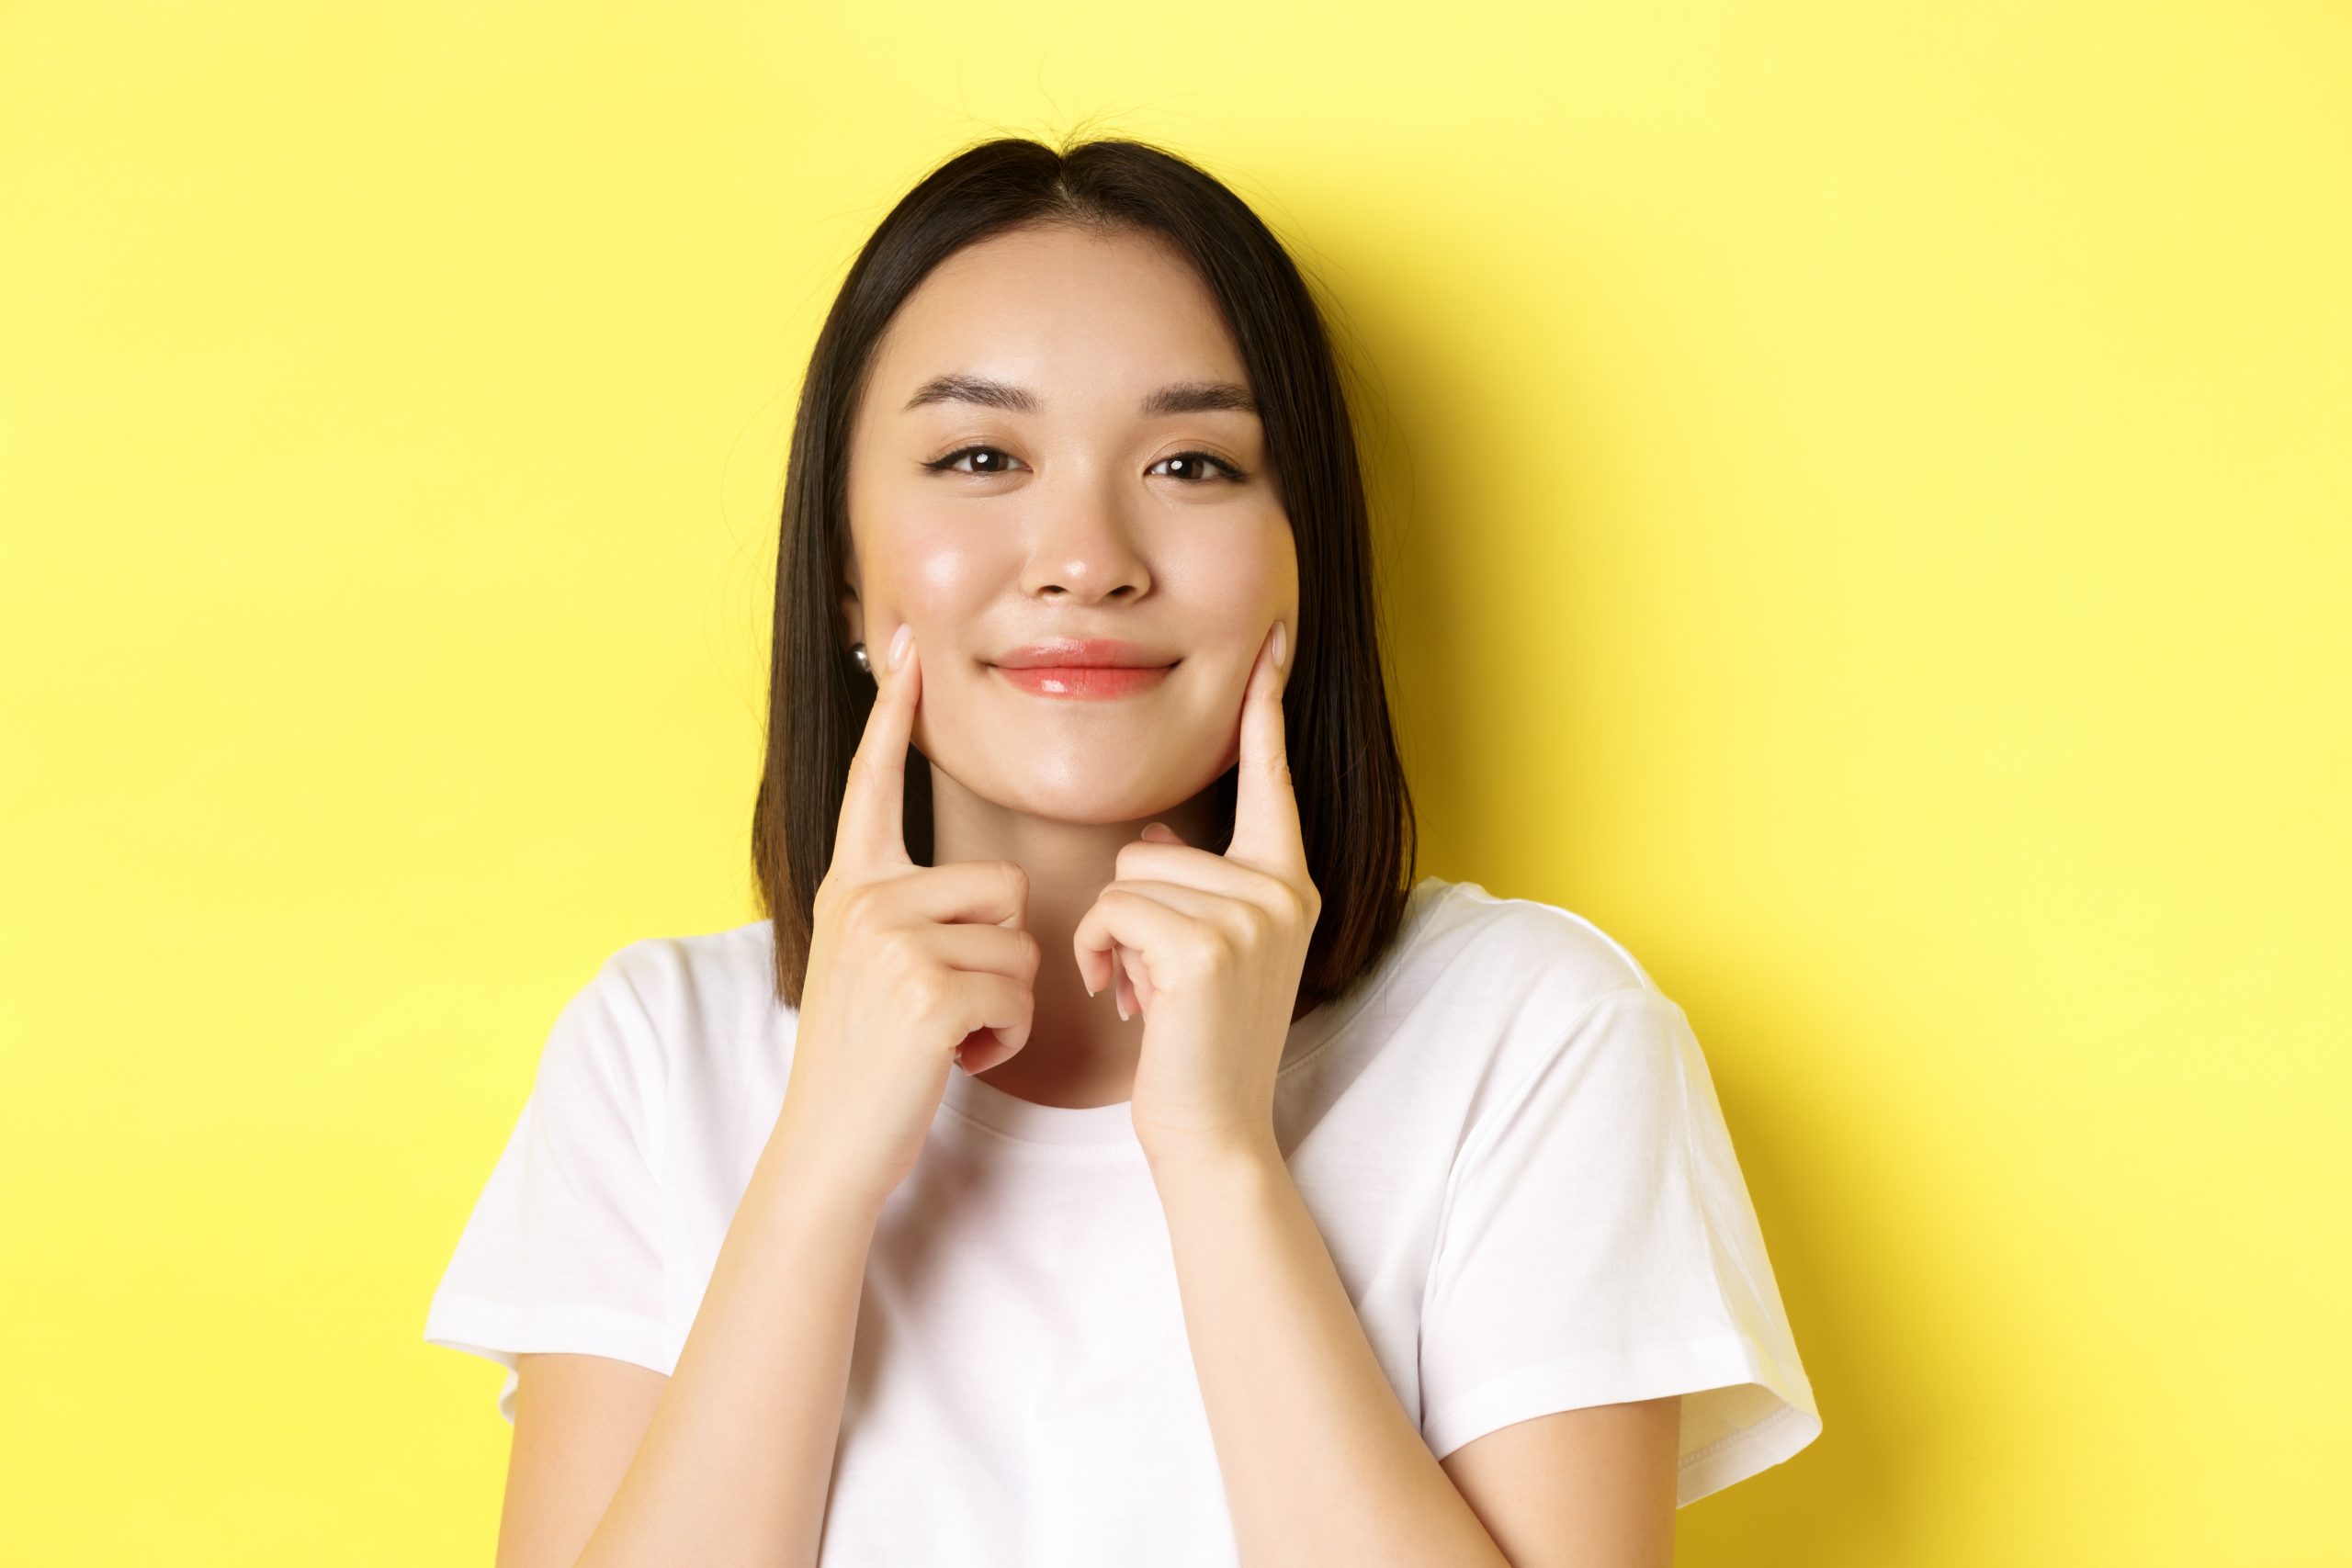 Beauty and skincare. Close up of young asian woman with short dark hair, healthy glowing skin, smiling and touching dimples on cheeks, standing over yellow background